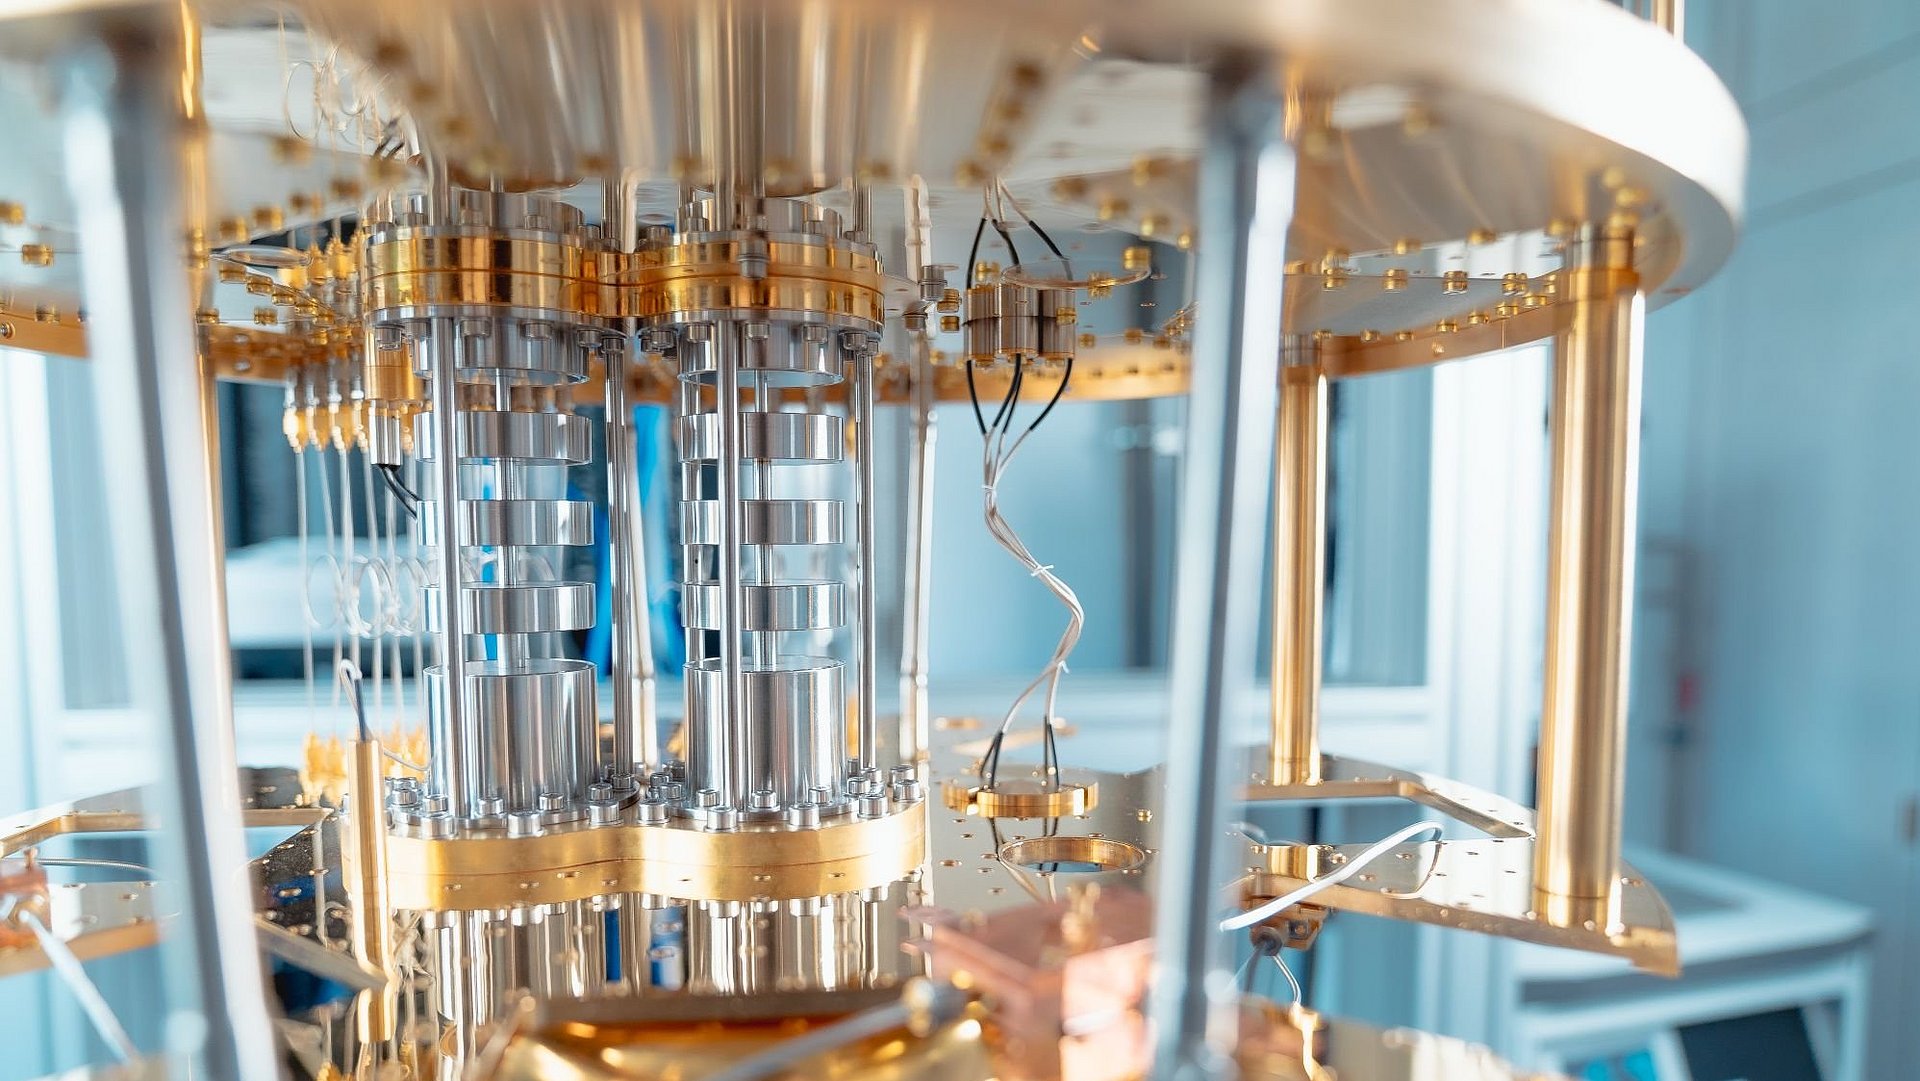 Image shows the cryostat of a quantum computer.